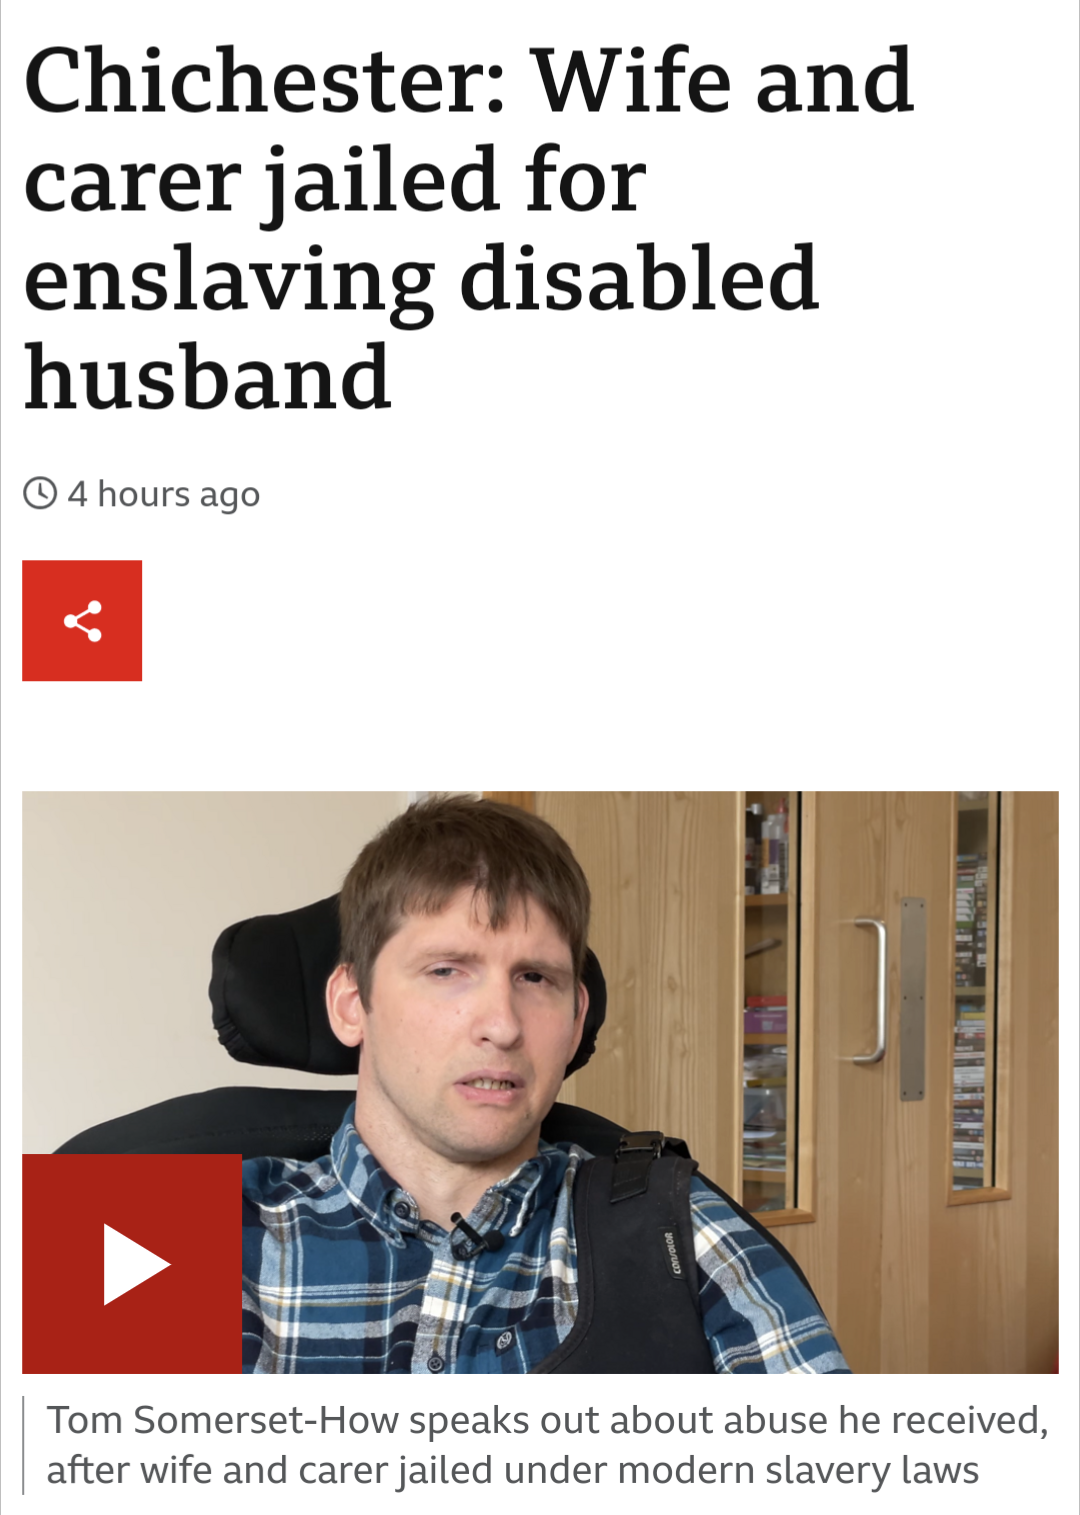 trashy people - human behavior - Chichester Wife and carer jailed for enslaving disabled husband 4 hours ago Tom SomersetHow speaks out about abuse he received, after wife and carer jailed under modern slavery laws